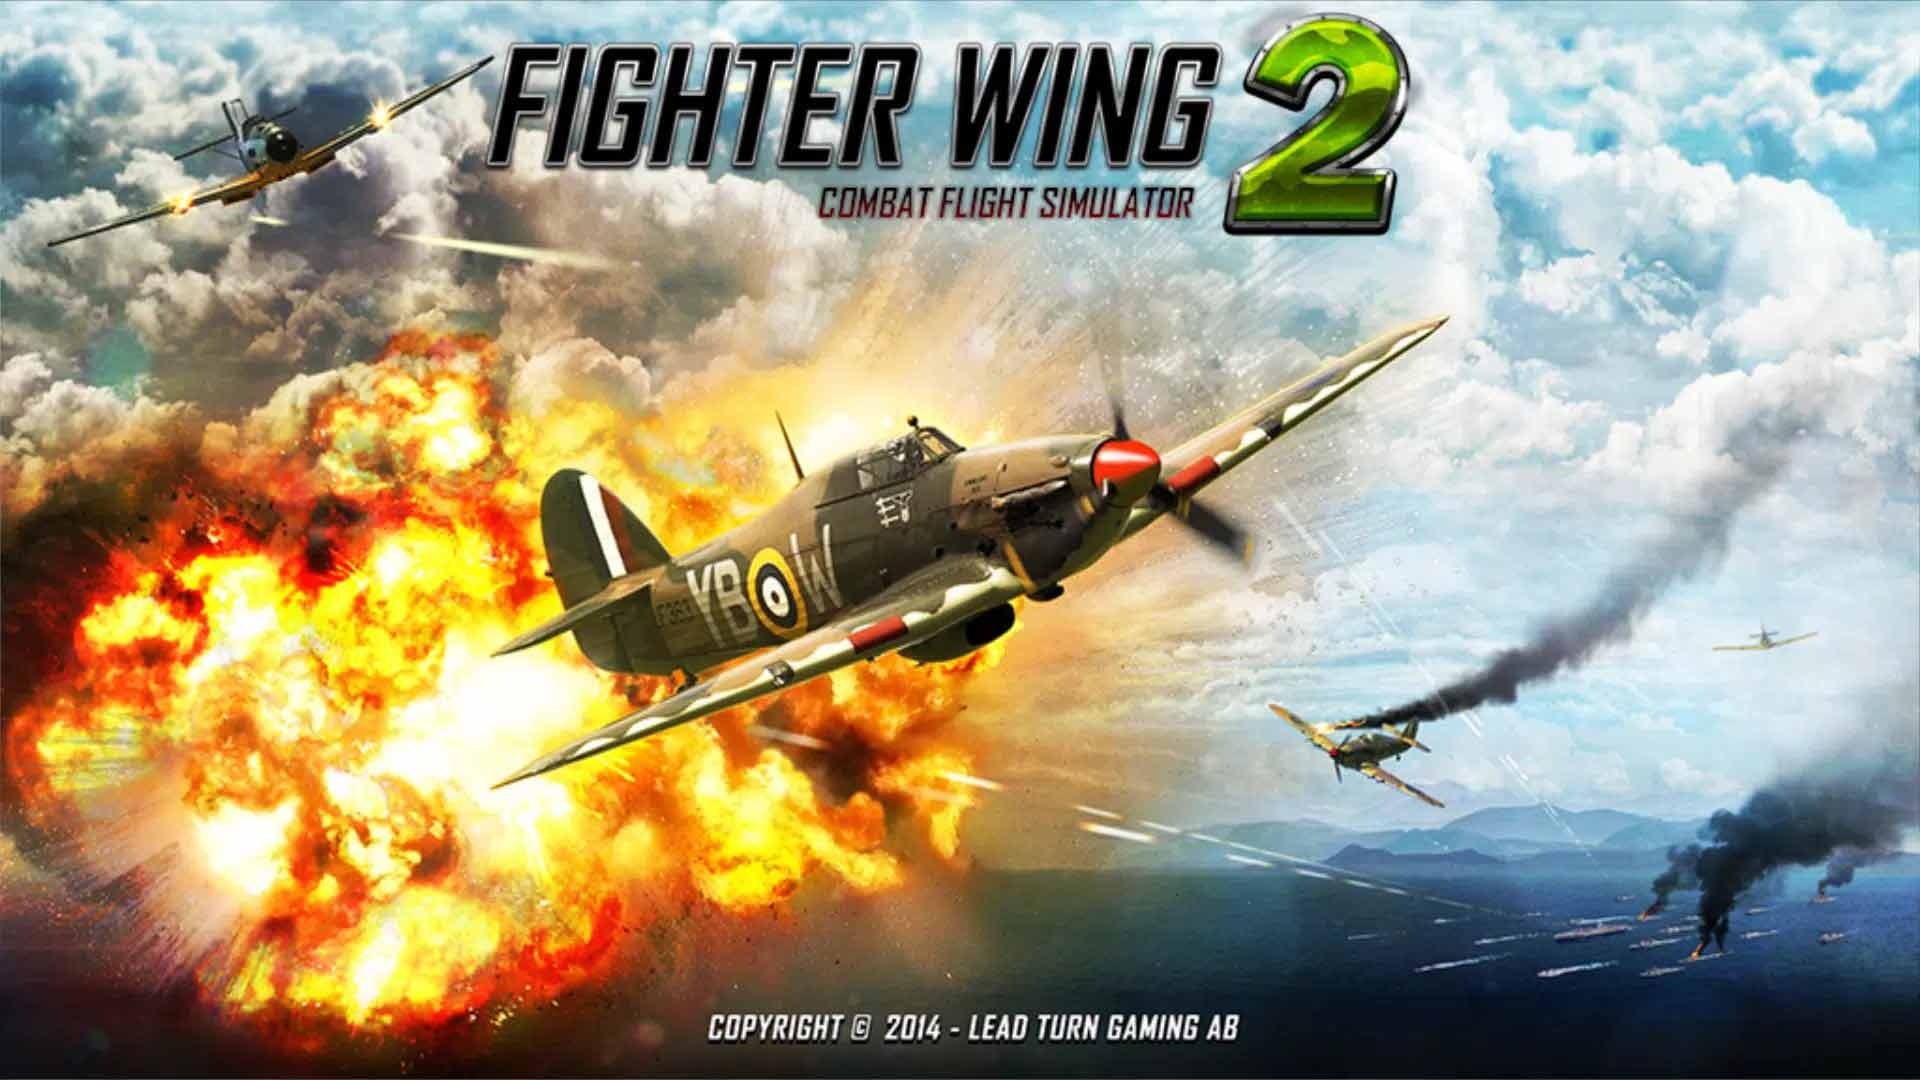 FighterWing 2 Flight Simulator android game